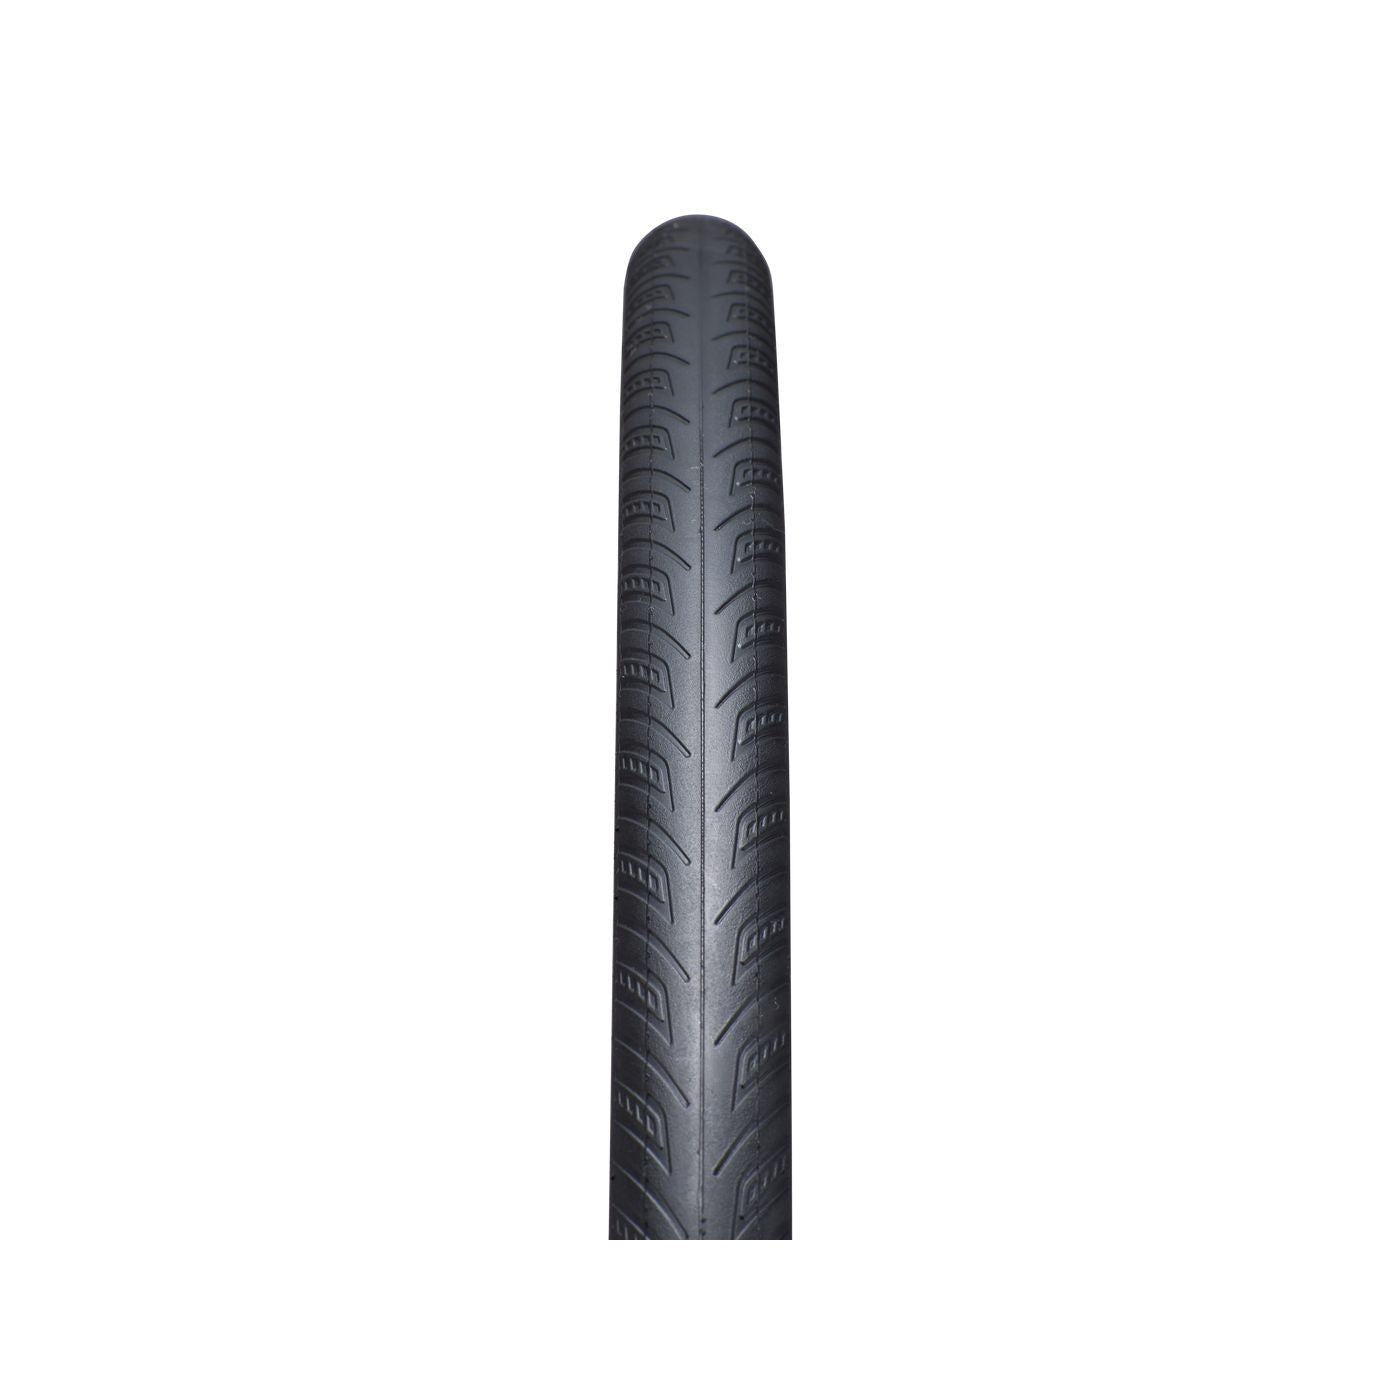 Specialized All Condition Armadillo Elite Reflect 700c Bike Tire - Tires - Bicycle Warehouse